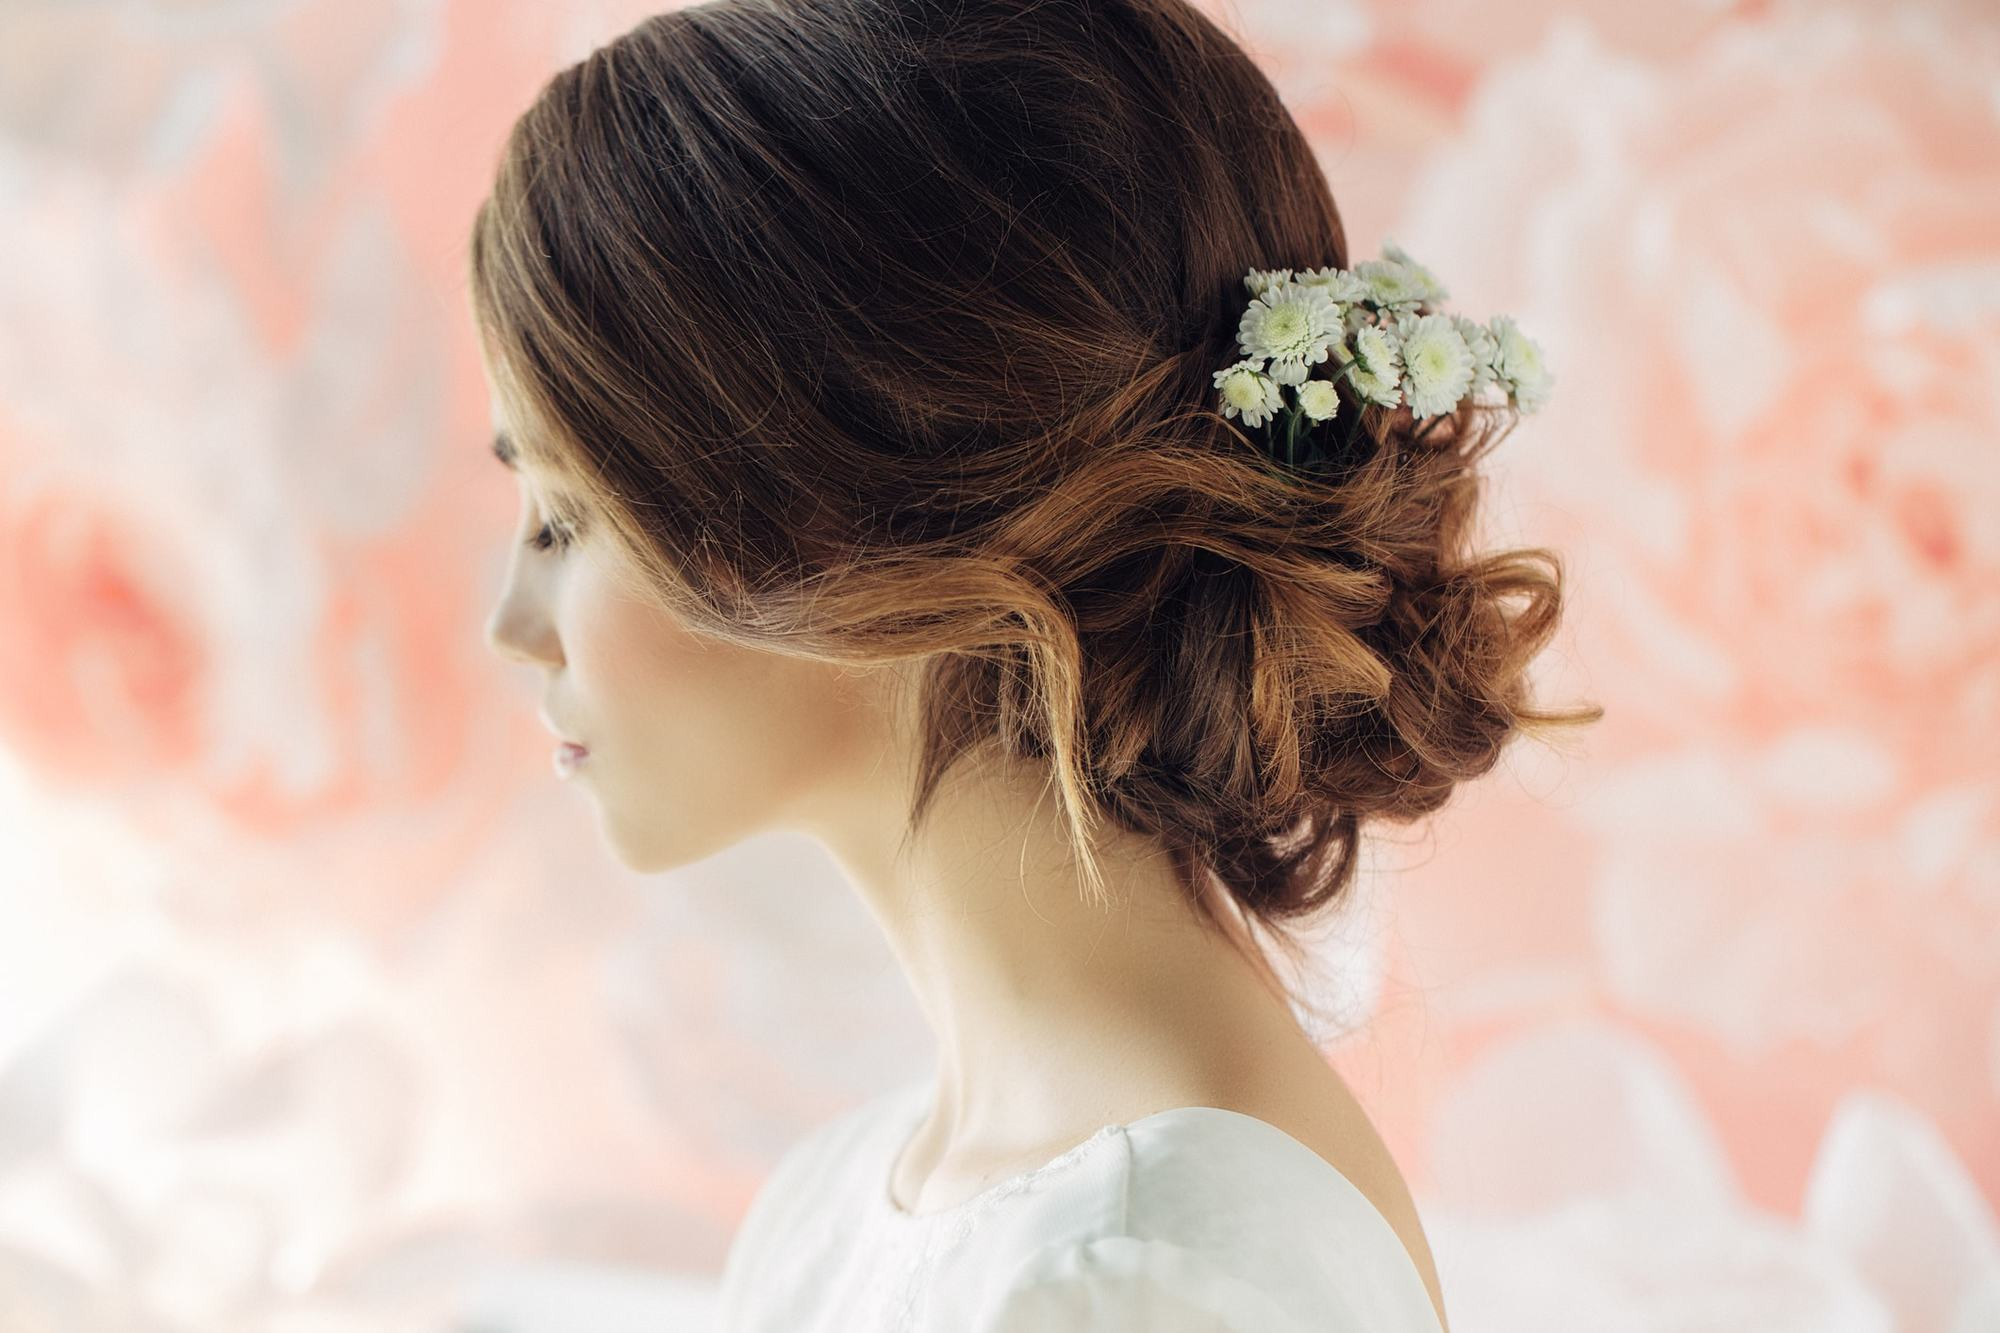 Flower Girl Updo Hairstyles
 Flower Girl Hairstyles That Flatter Girls of All Ages